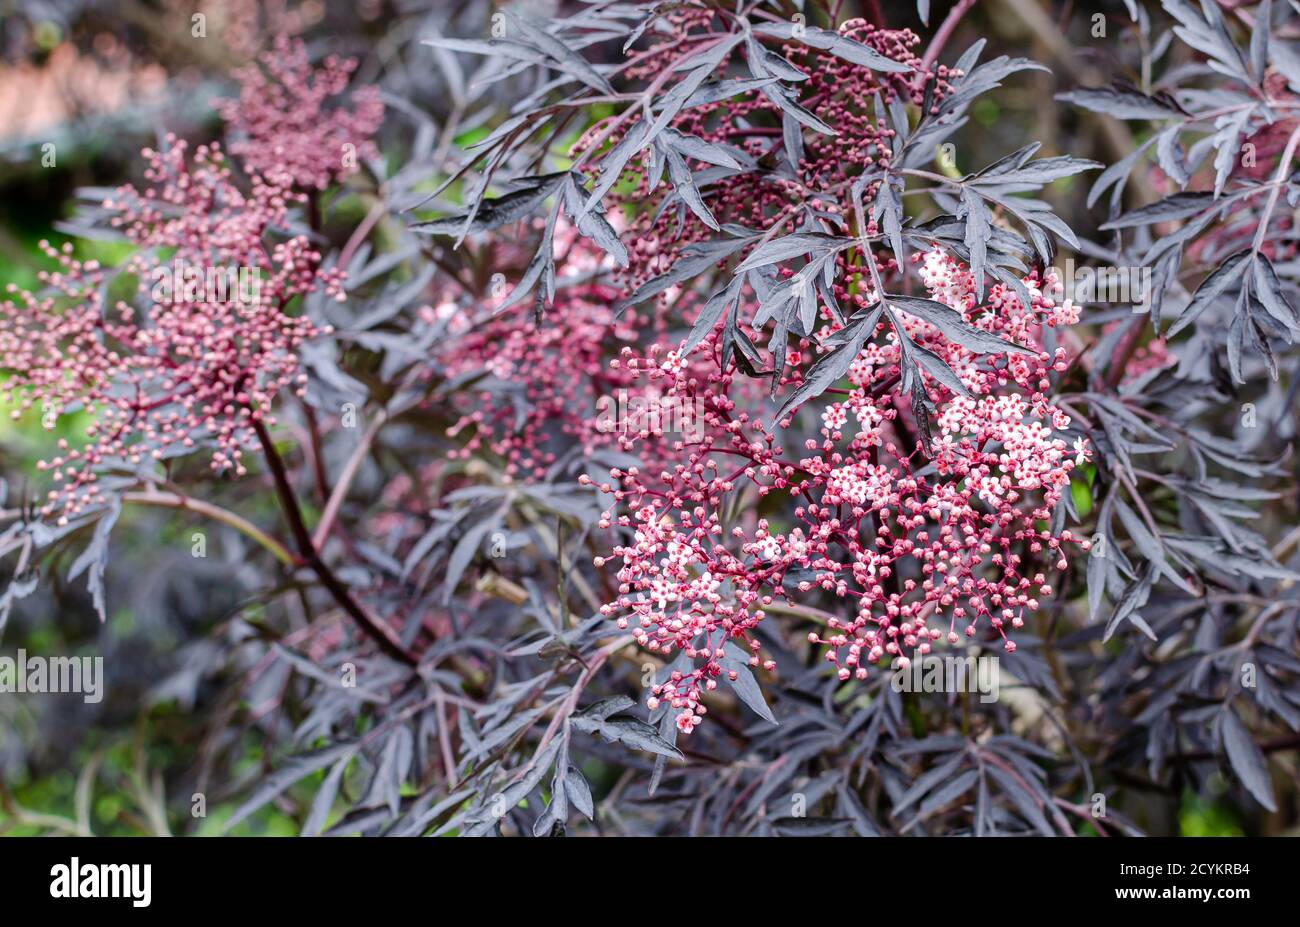 Sambucus nigra 'Eva' is blooming with its black and purple leaves and creamy pink flowers Stock Photo